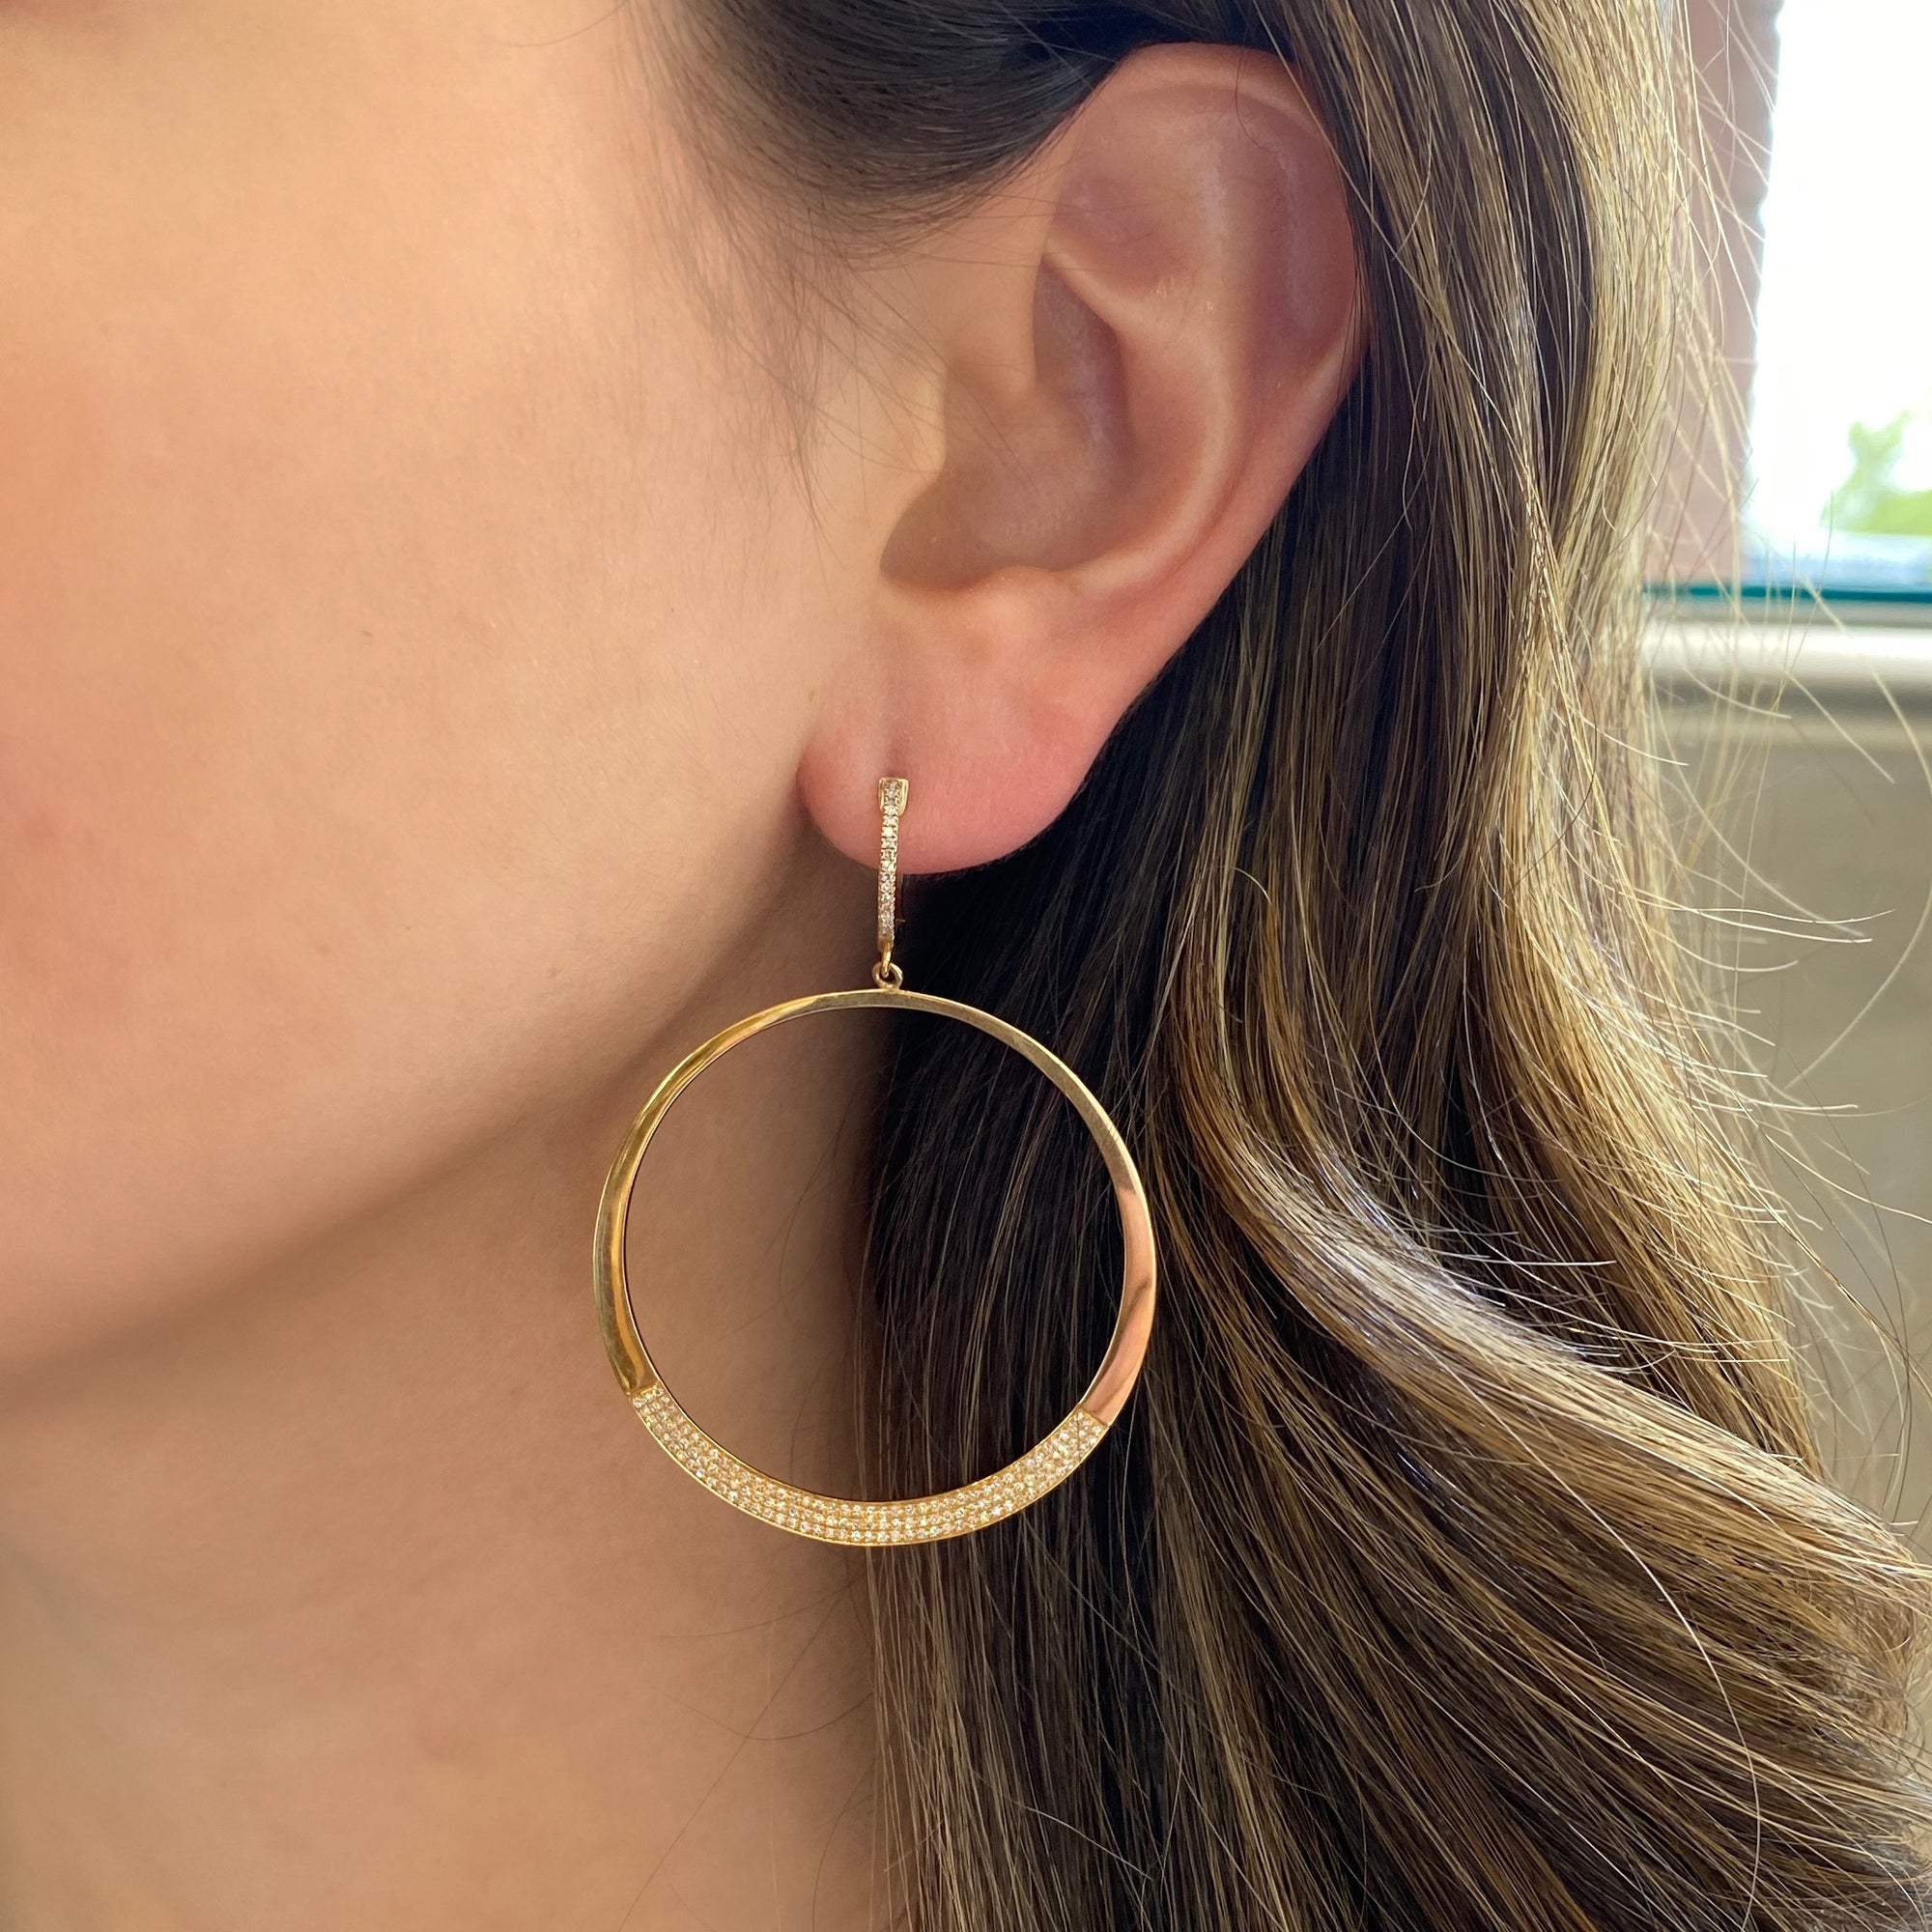 Circle Statement Earrings  These partial diamond hoops are composed of 14k gold, 9.66 grams, 284 round pave-set diamonds weighing .64 carats, making for a glamourous statement piece to amplify any look.